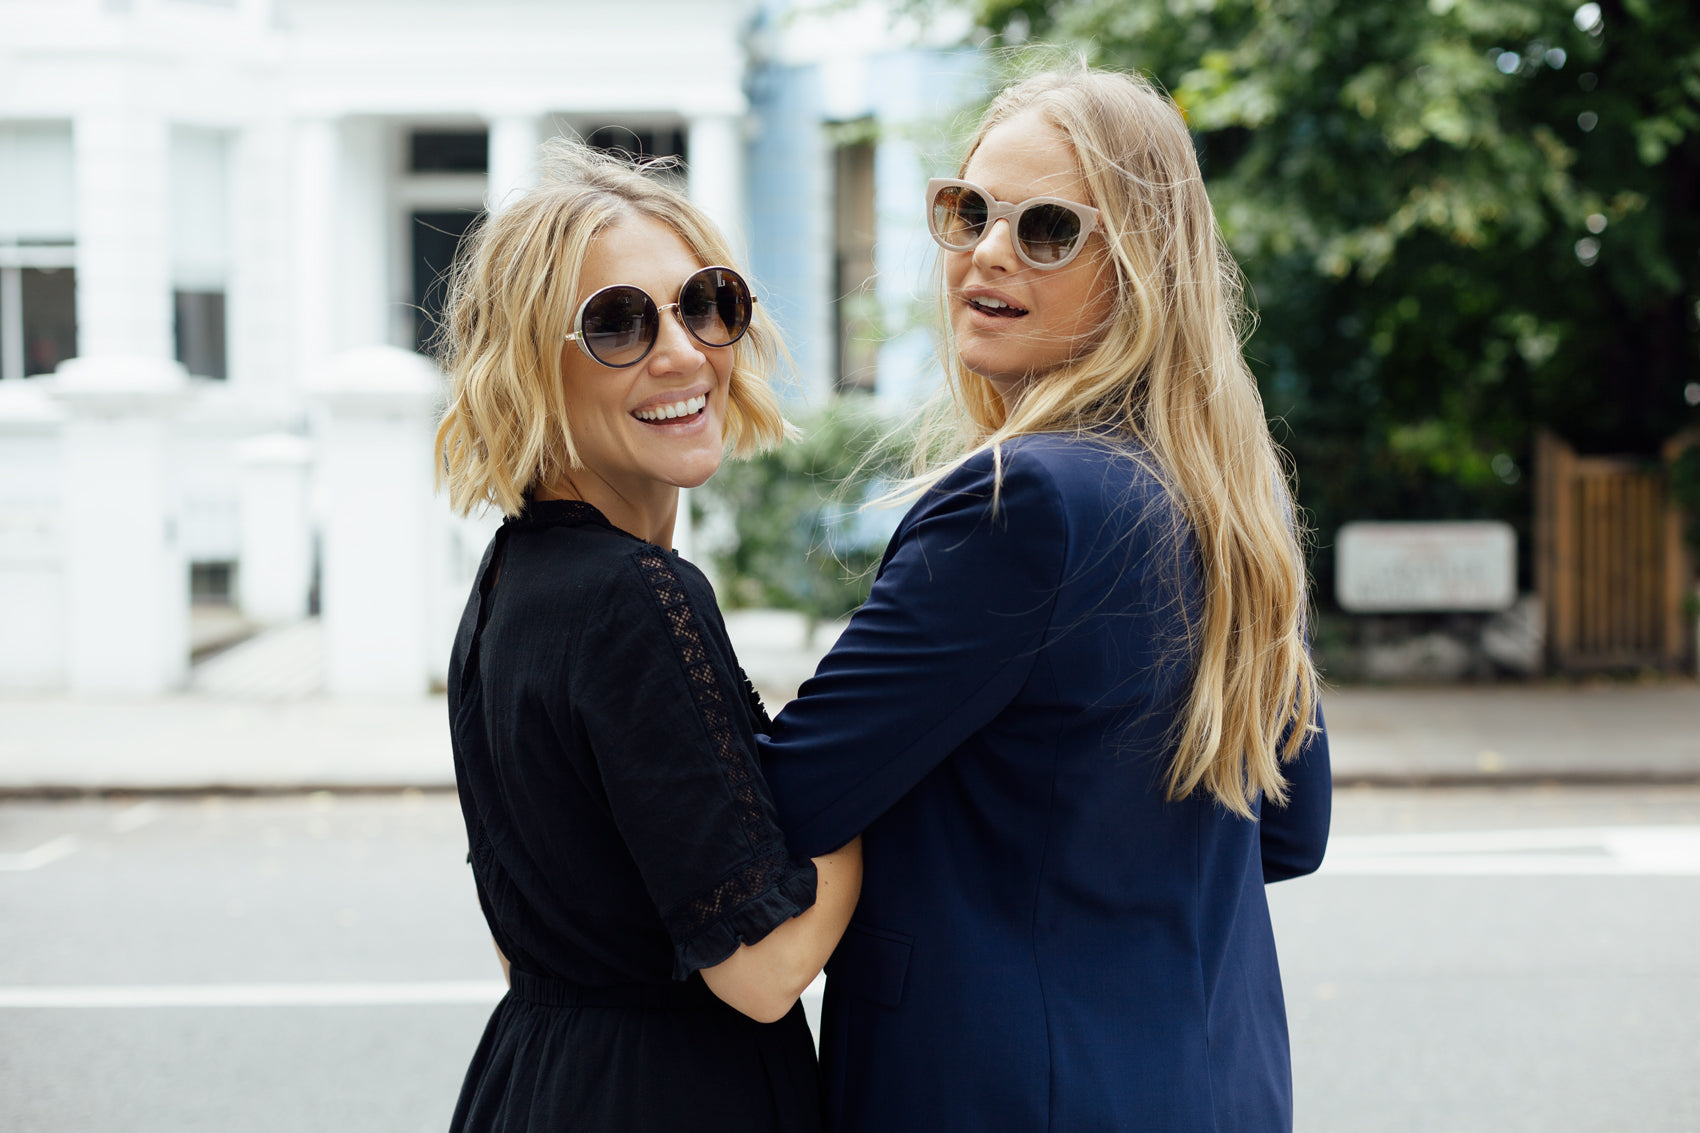 We talk fashion, friendship and favourite destinations with the founders of Wardrobe ICONS